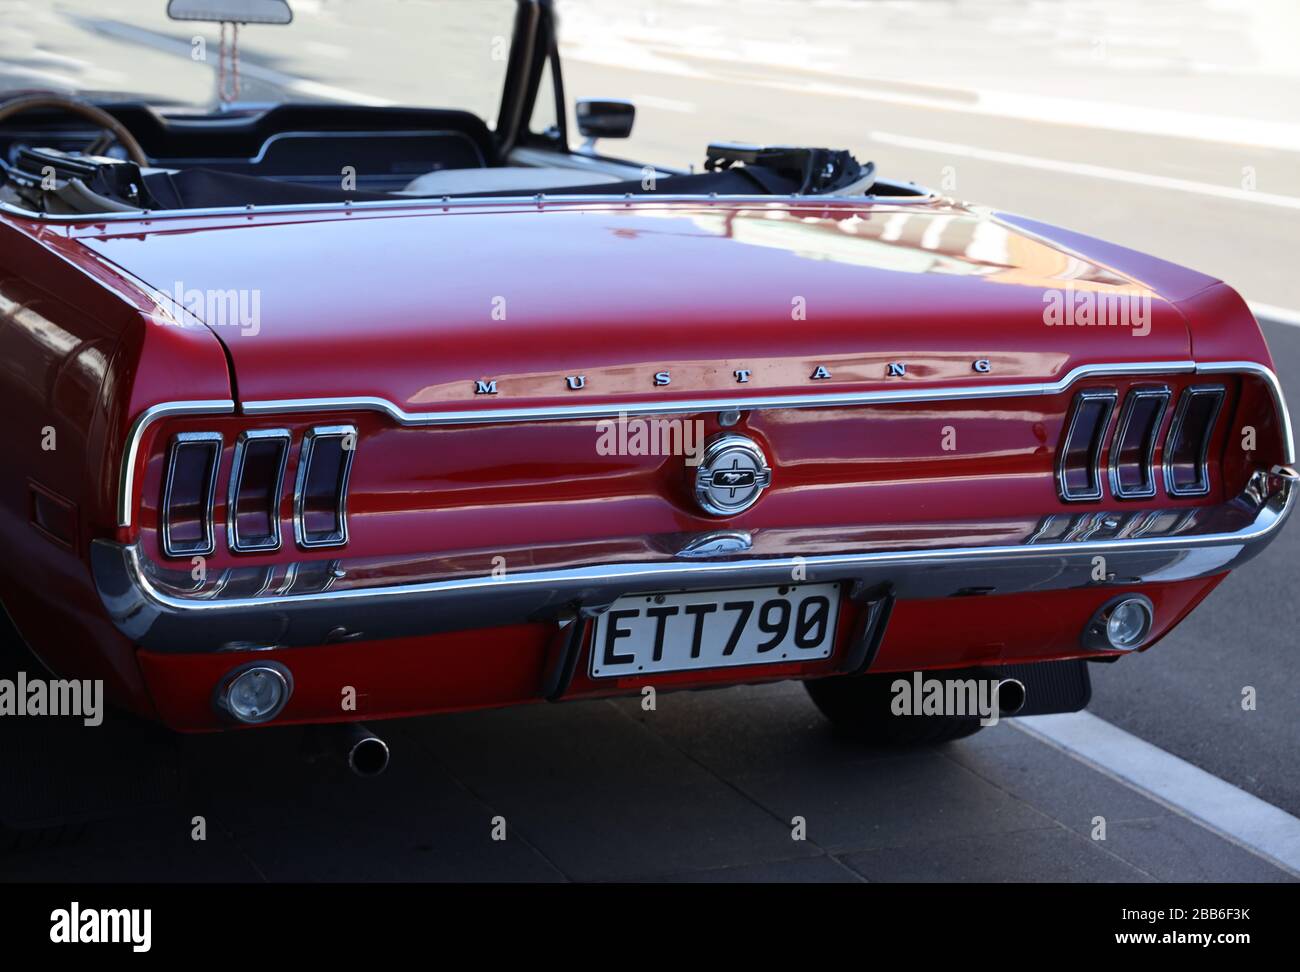 Classic American vintage convertible Ford Mustang car. Rear view Napier ...